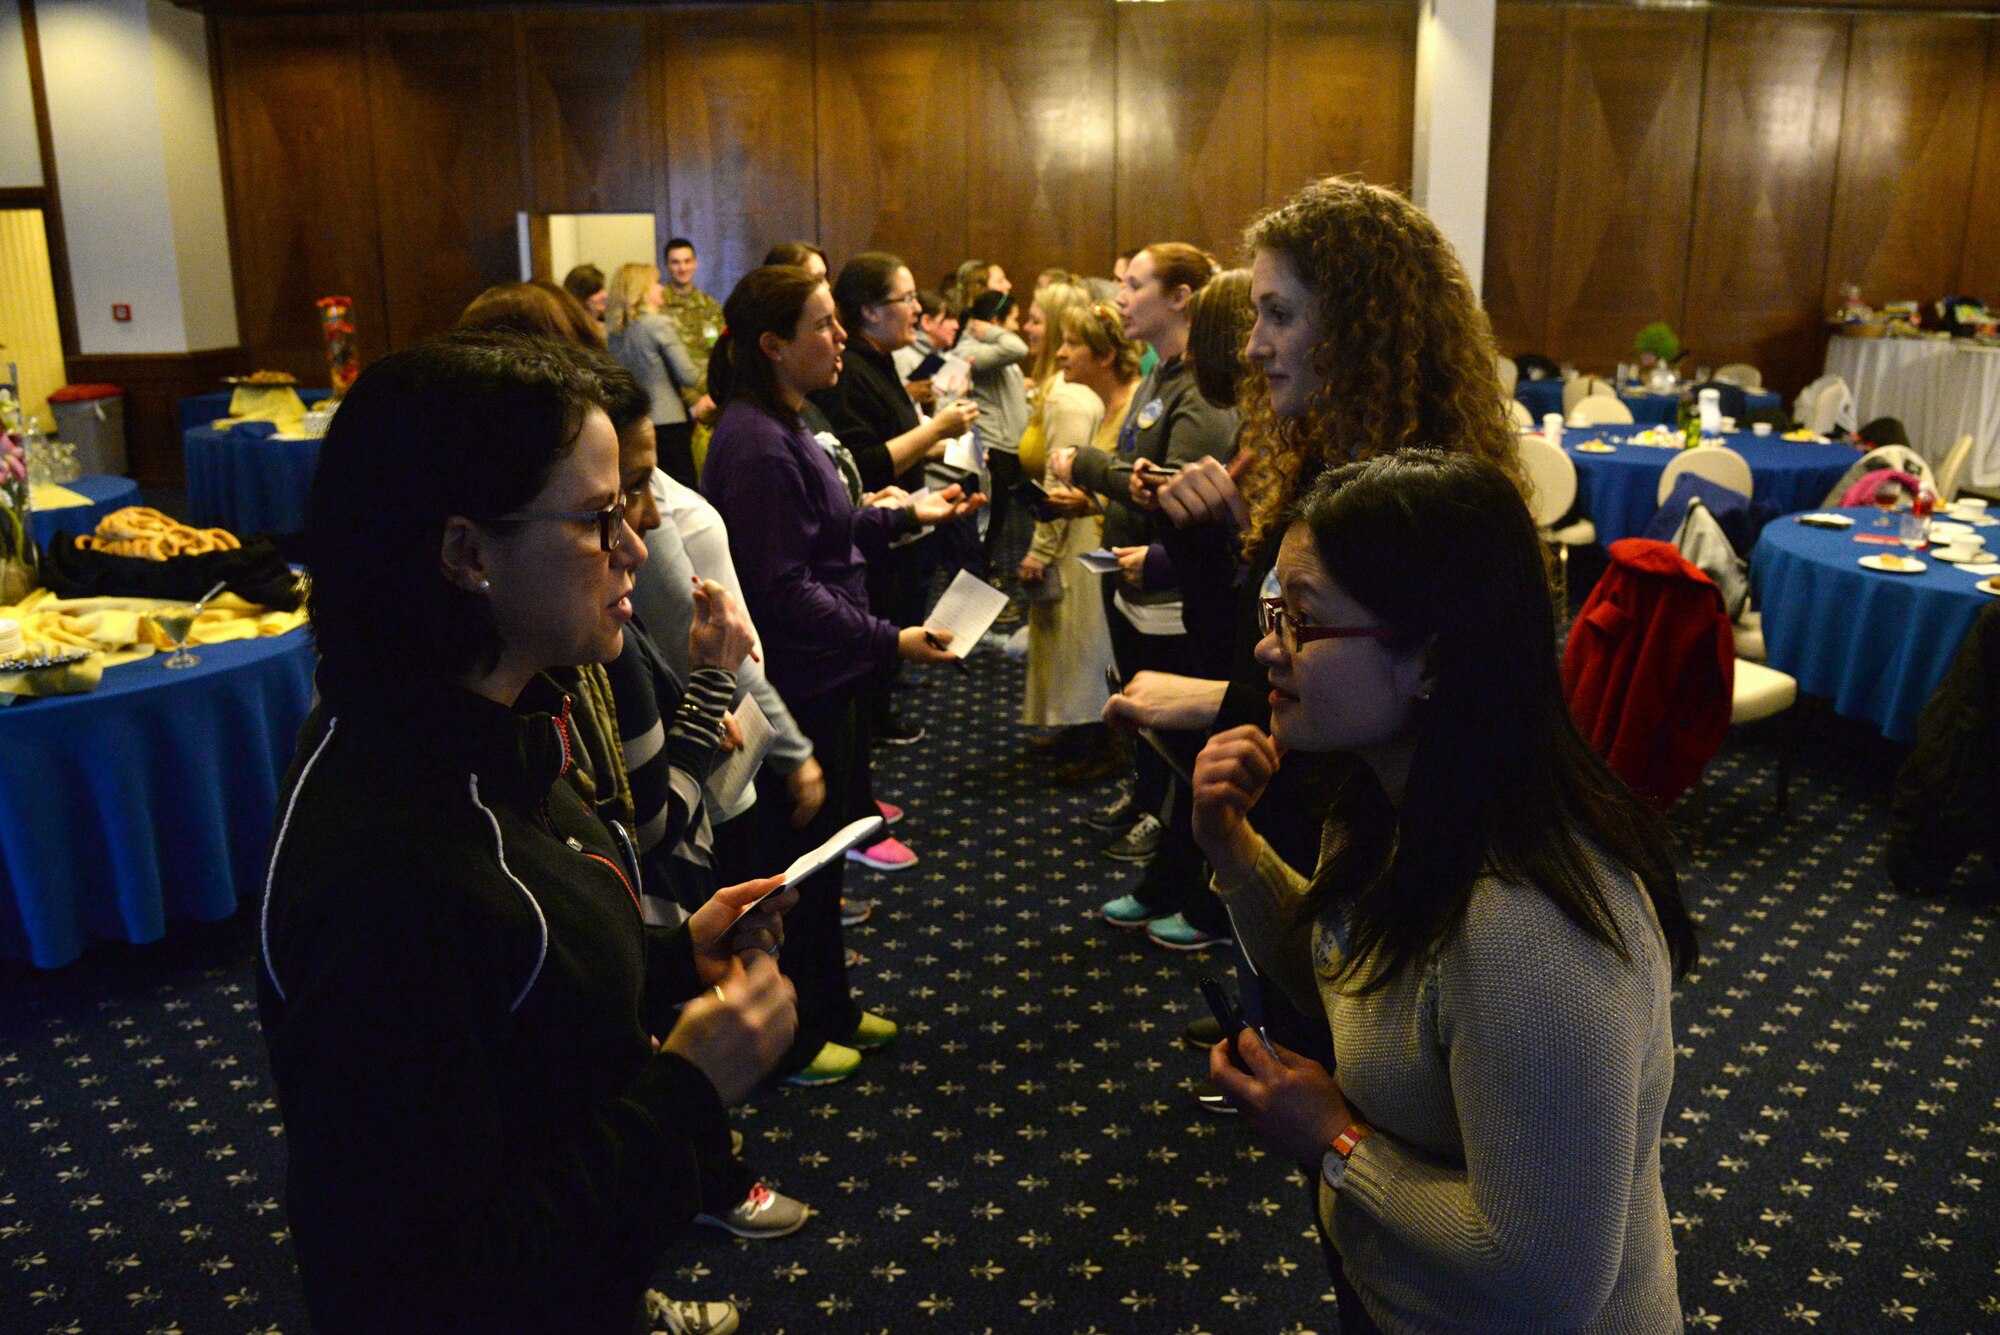 KMC spouses interact during the 86th Airlift Wing's SpouseFit event Feb. 23 at the Ramstein Officers' Club. The two-day event featured various activities. (U.S. Air Force photo by Airman 1st Class D. Blake Browning)